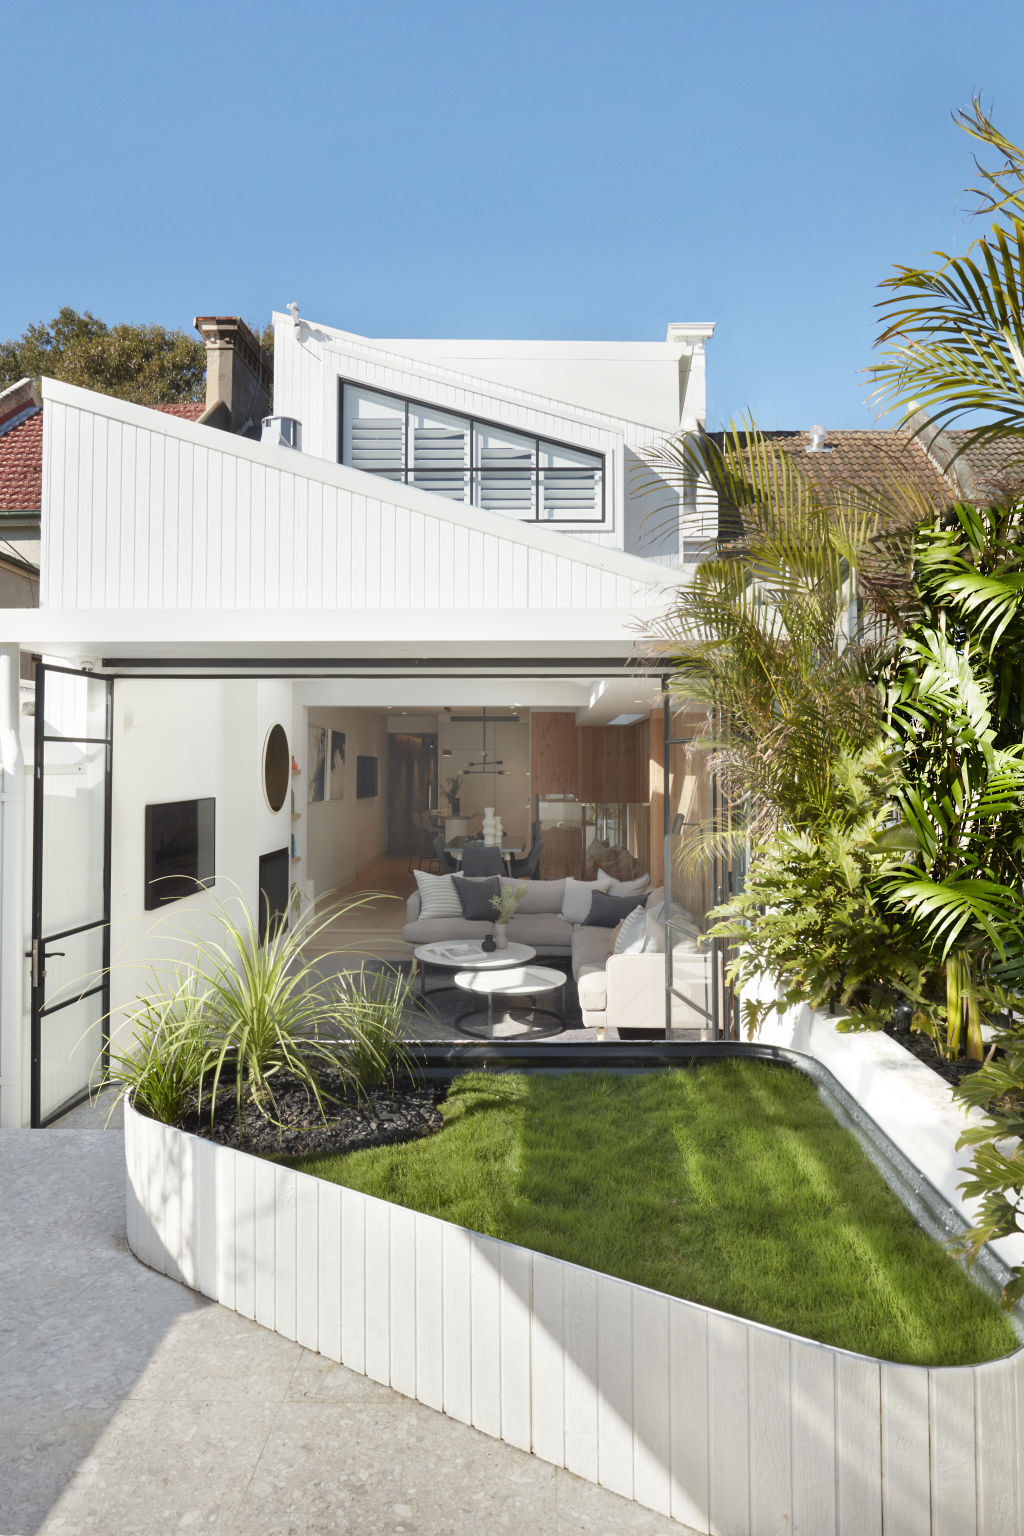 56 Great Buckingham Street, Redfern's renovation was inspired by one of Paddington's top-selling terraces.